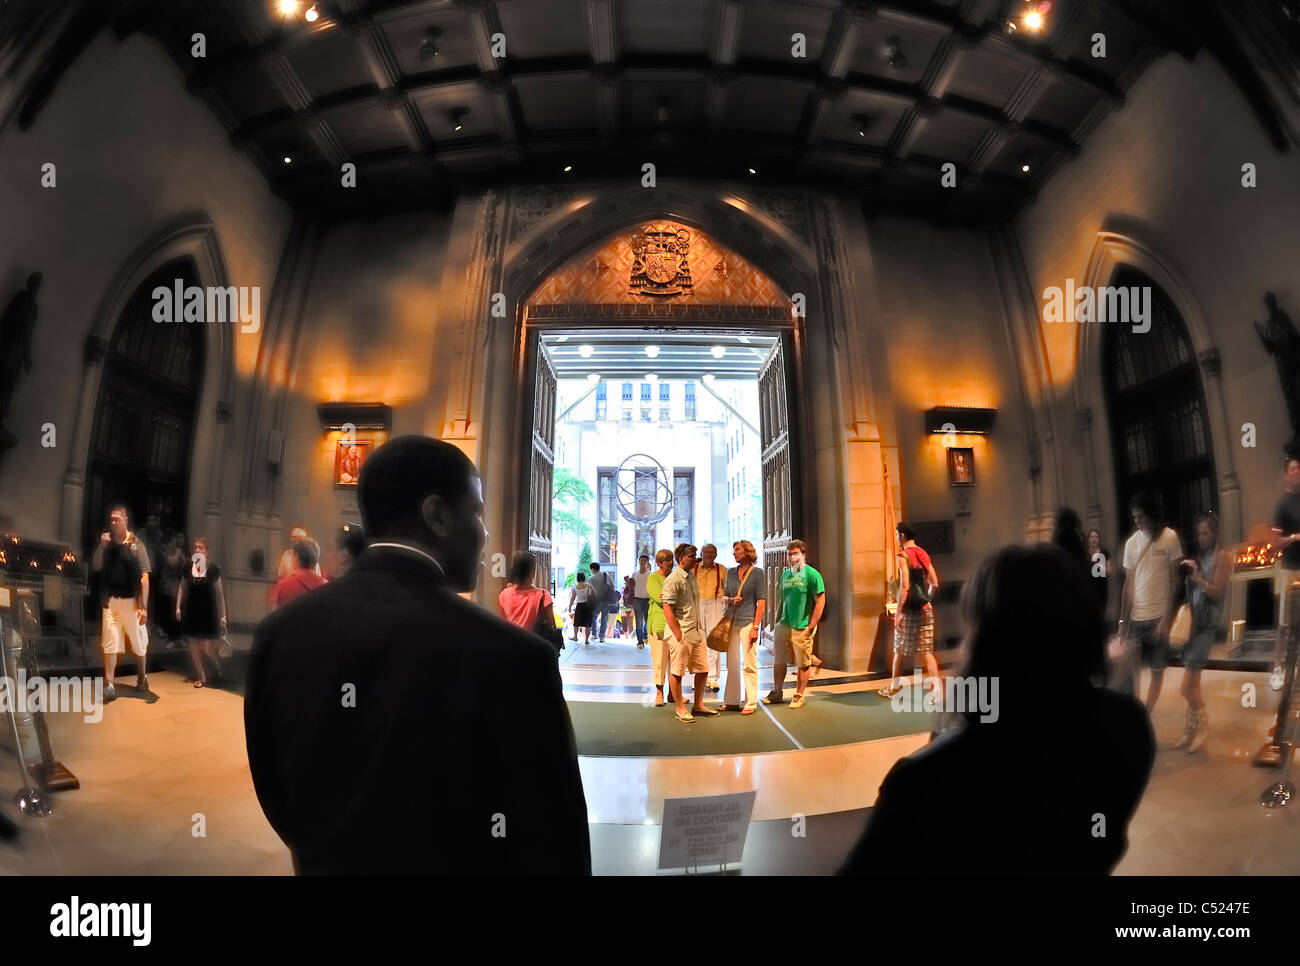 Inside St. Patrick's Cathedral lobby looking out to statue of Atlas, 5th Avenue, NYC, New York, USA, 2011 (fisheye lens view) Stock Photo